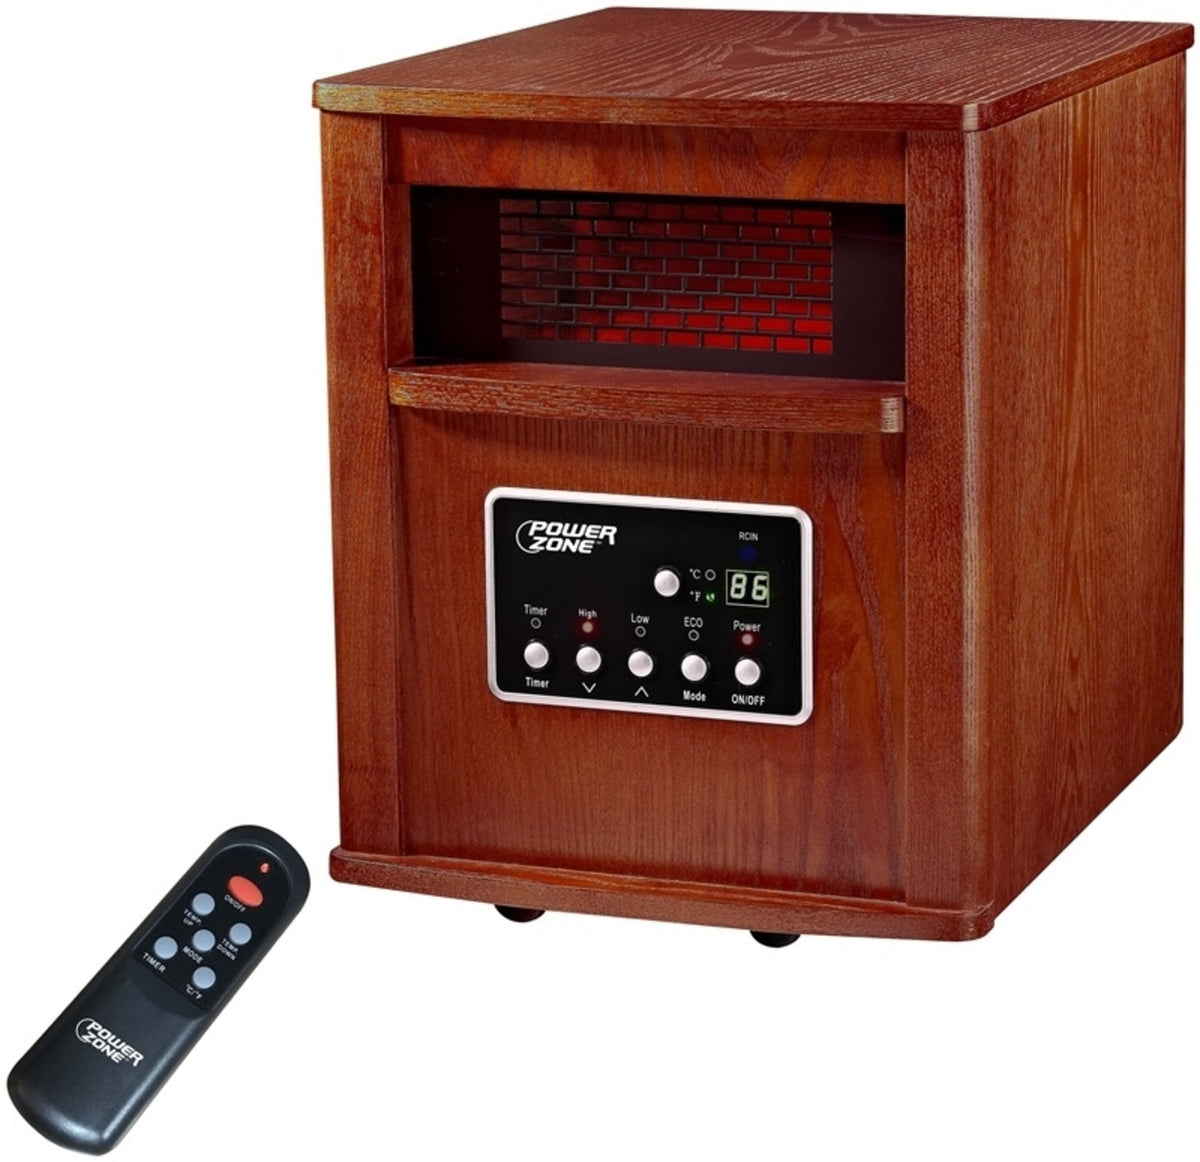 buy electric heaters at cheap rate in bulk. wholesale & retail bulk heat & cooling goods store.